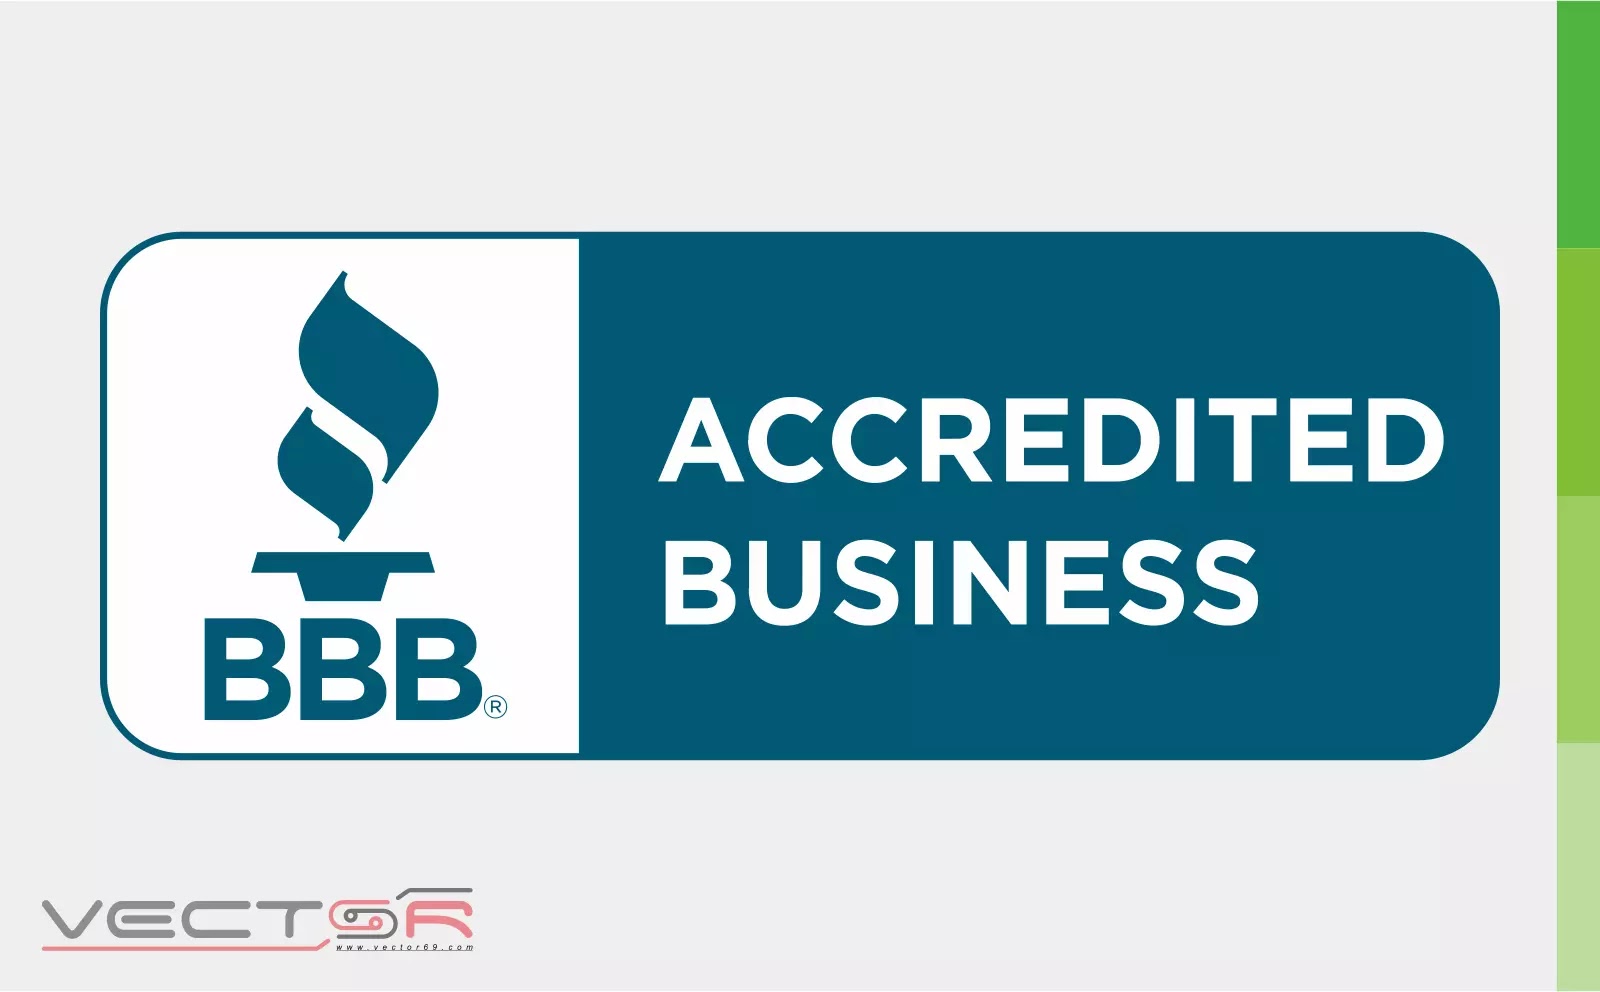 BBB Accredited Business Horizontal Seal - Download Vector File CDR (CorelDraw)